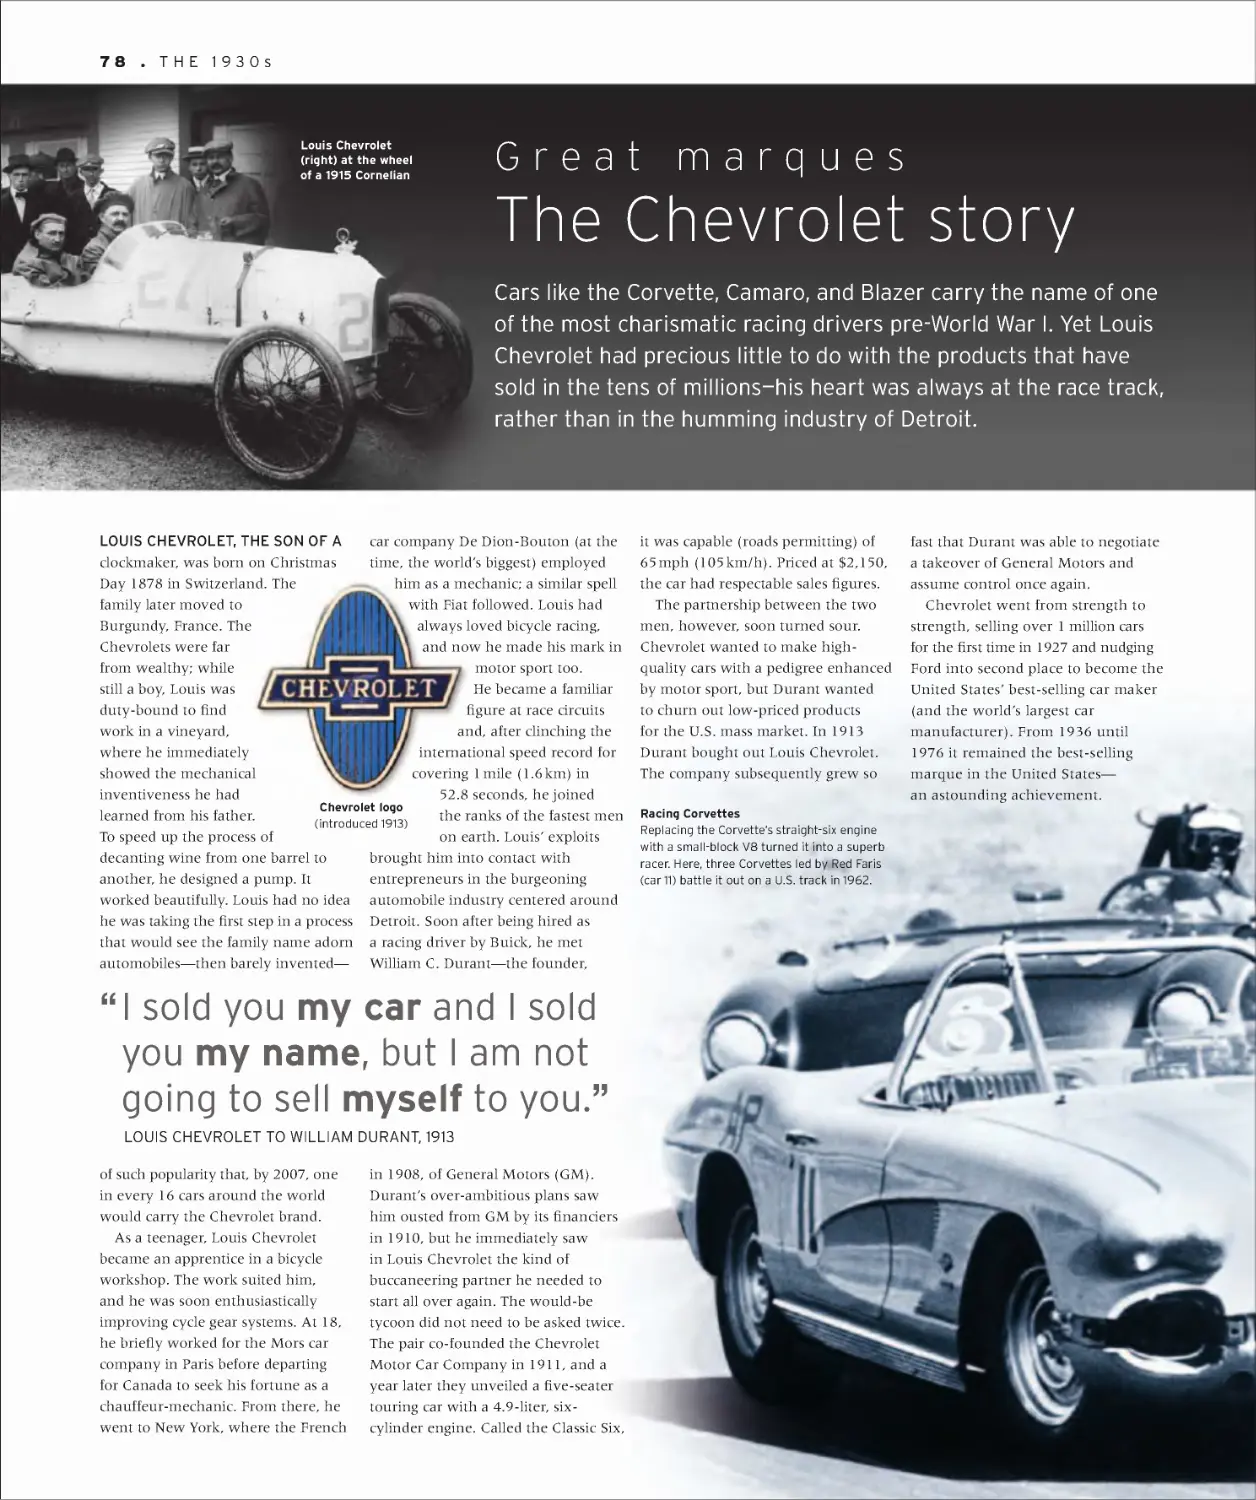 Great marques: The Chevrolet story 78